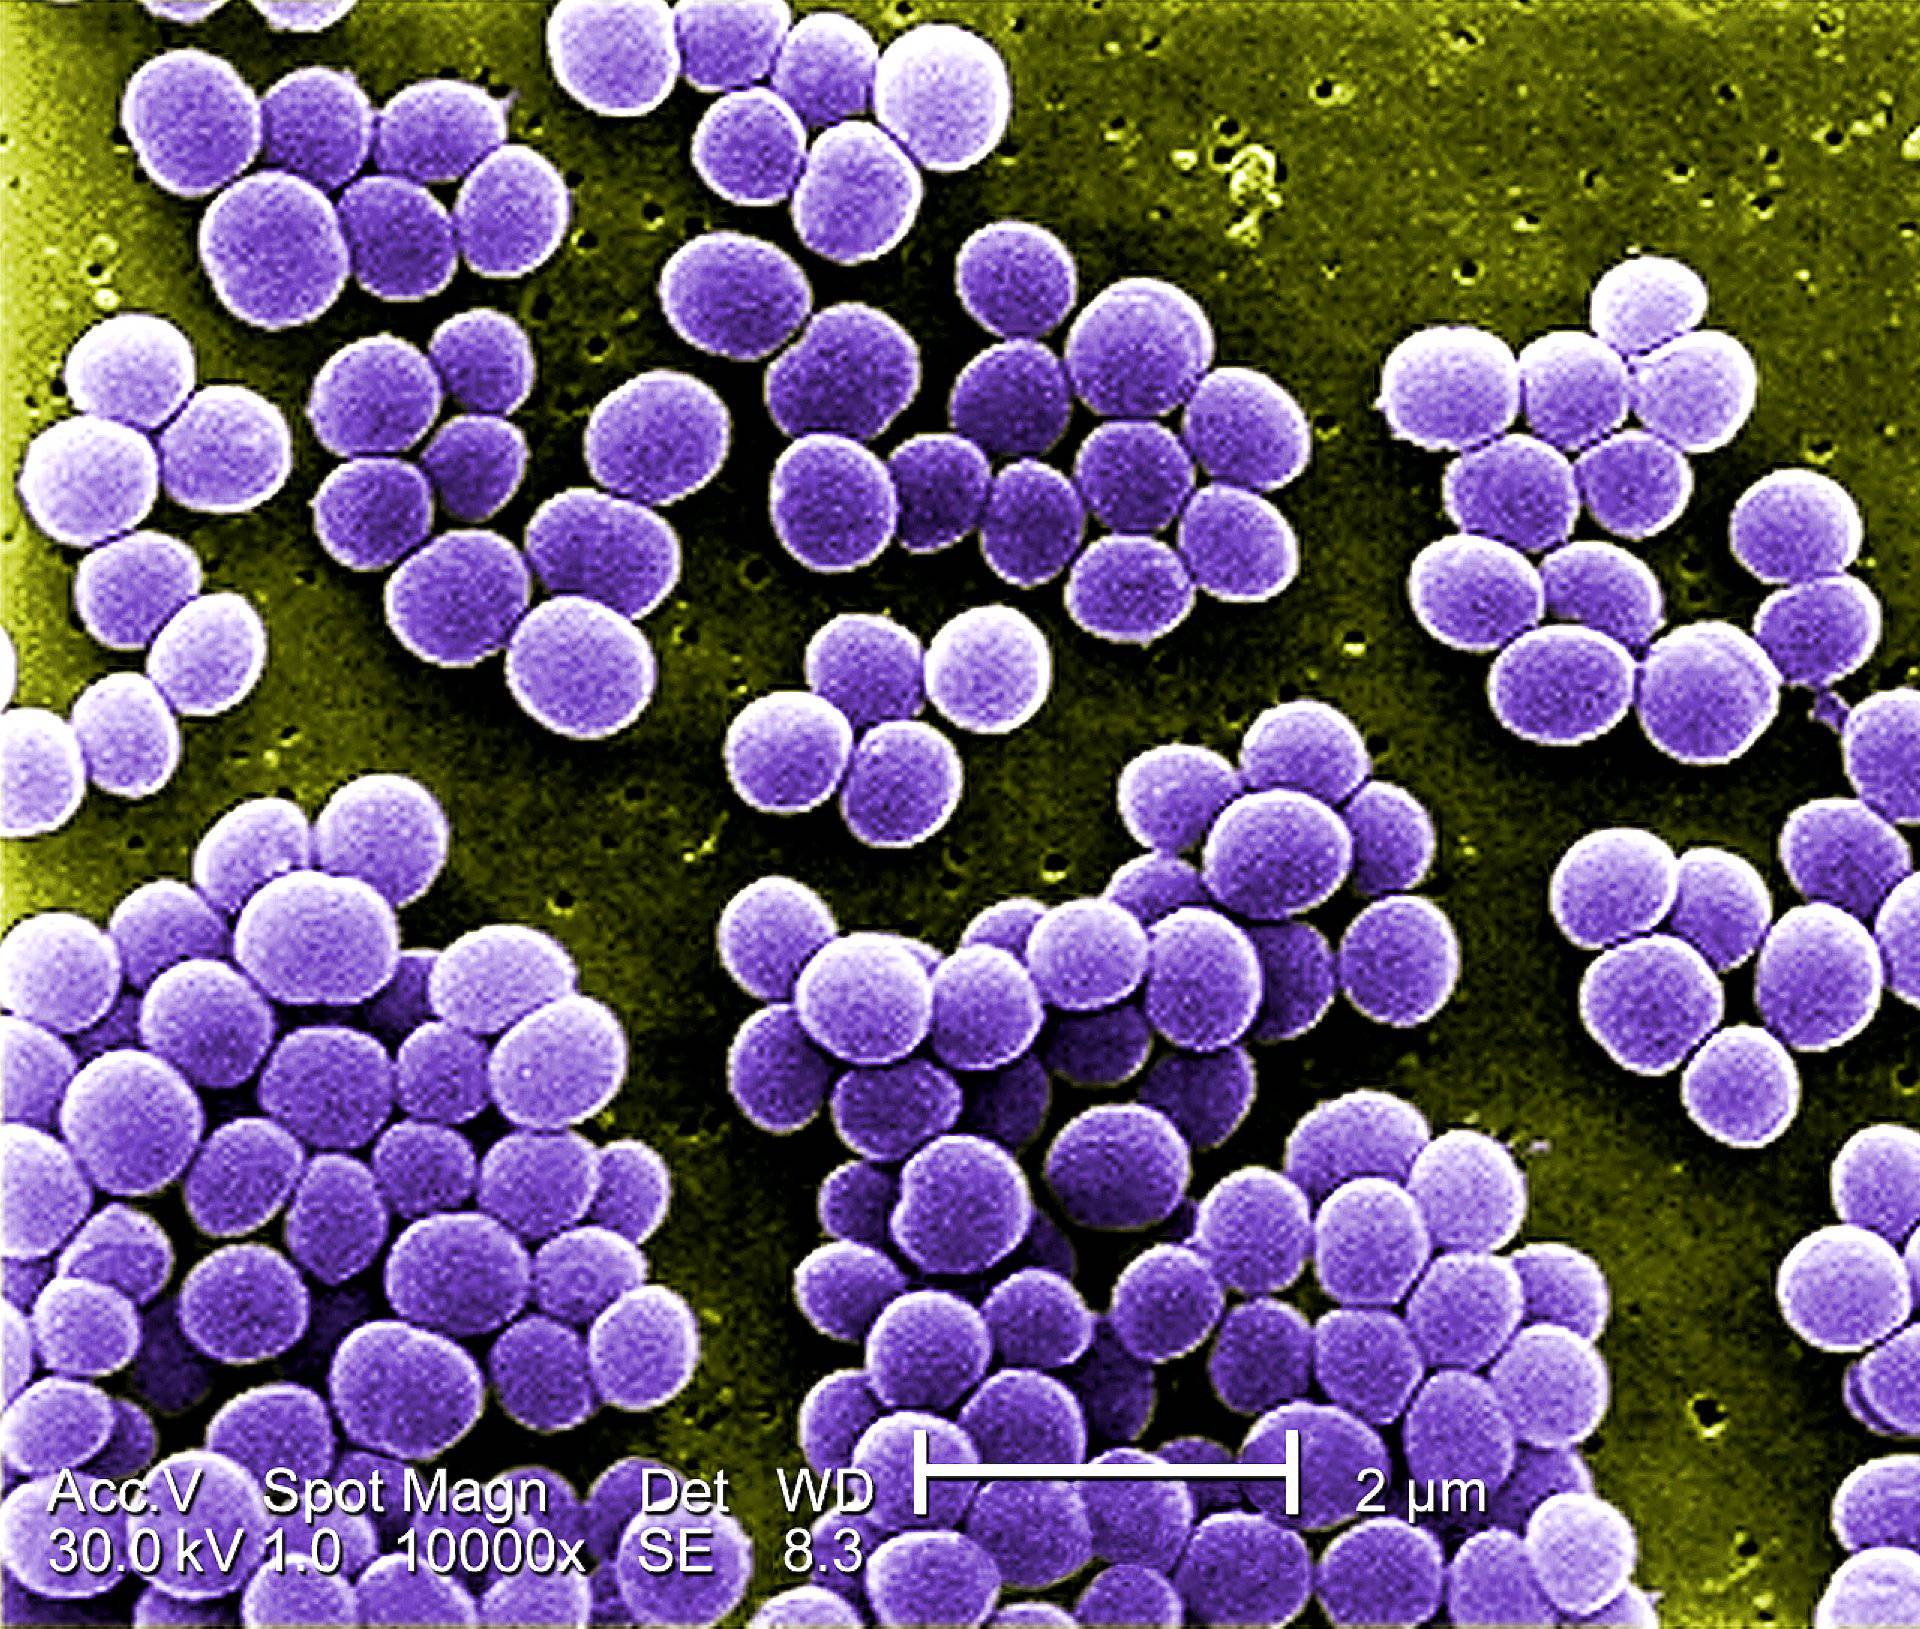 Under a high magnification of 10000x strain of staphylococcus au